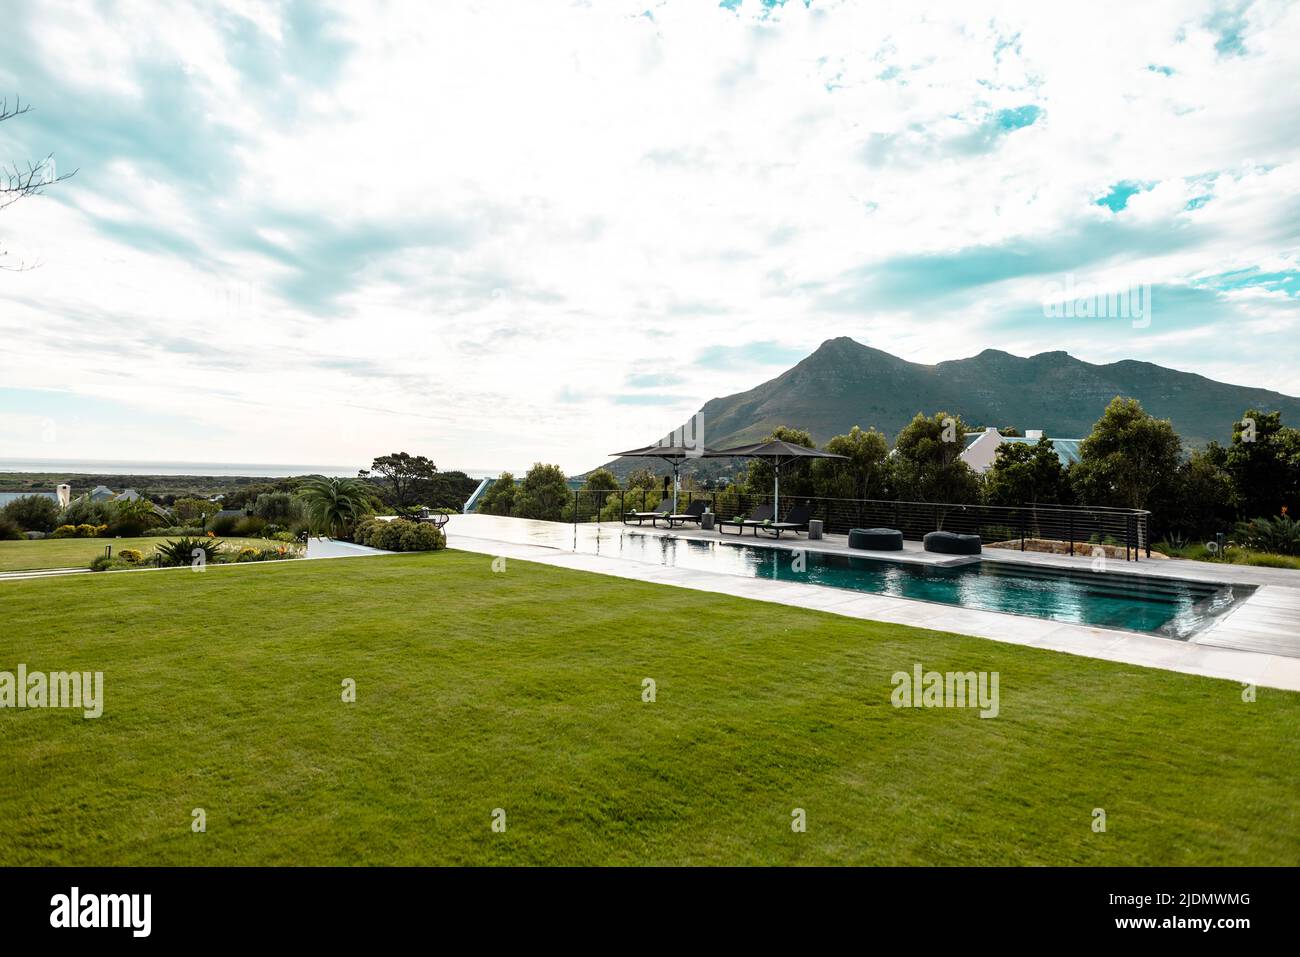 Scenic view of grassy land and swimming pool against mountain and cloudy sky Stock Photo